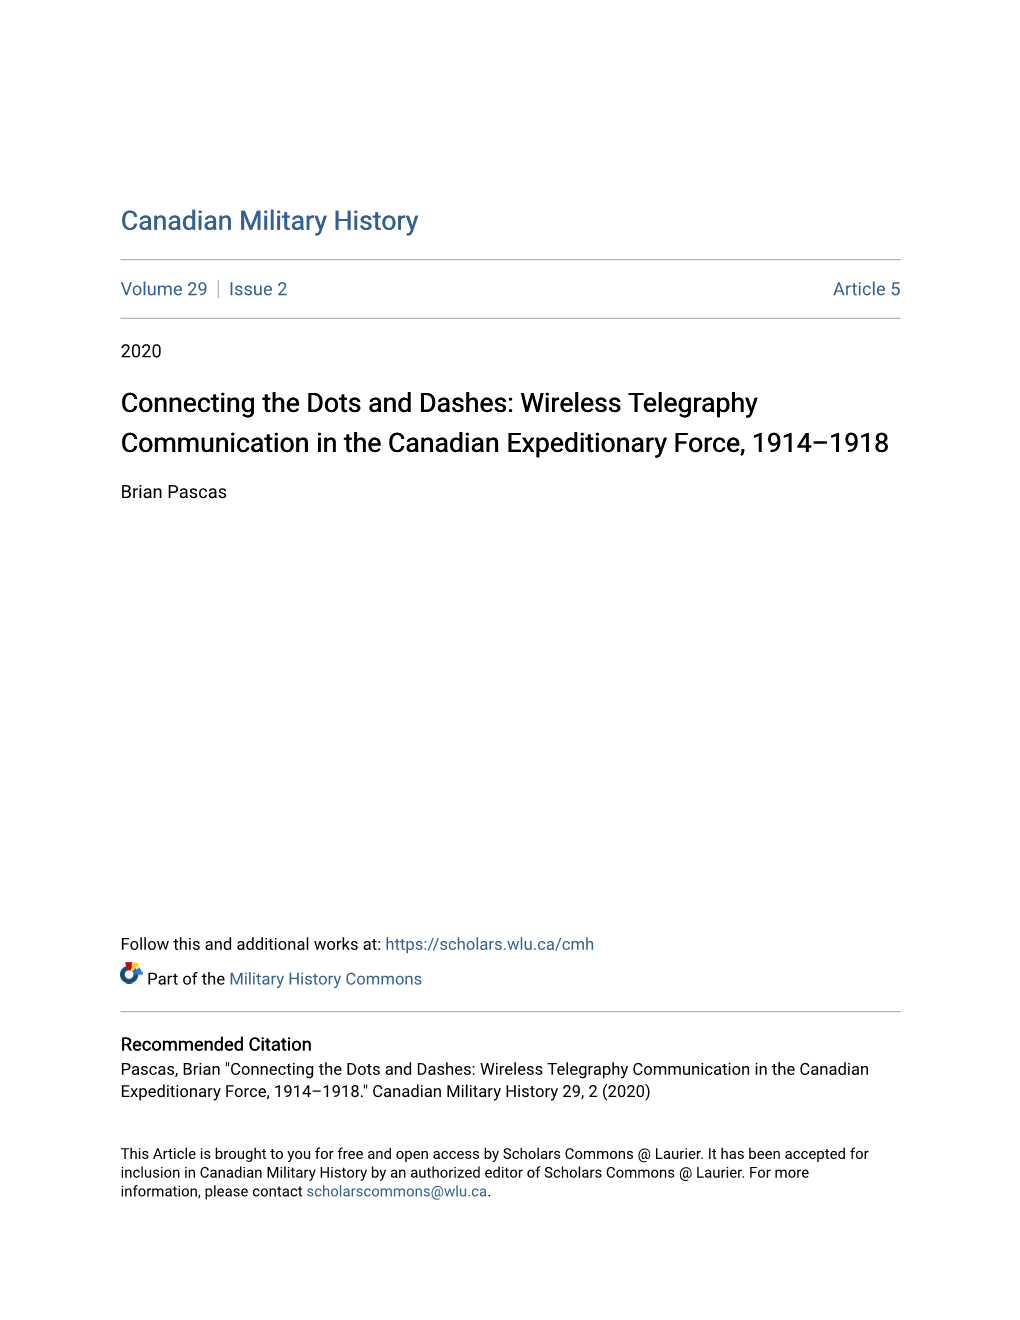 Wireless Telegraphy Communication in the Canadian Expeditionary Force, 1914–1918